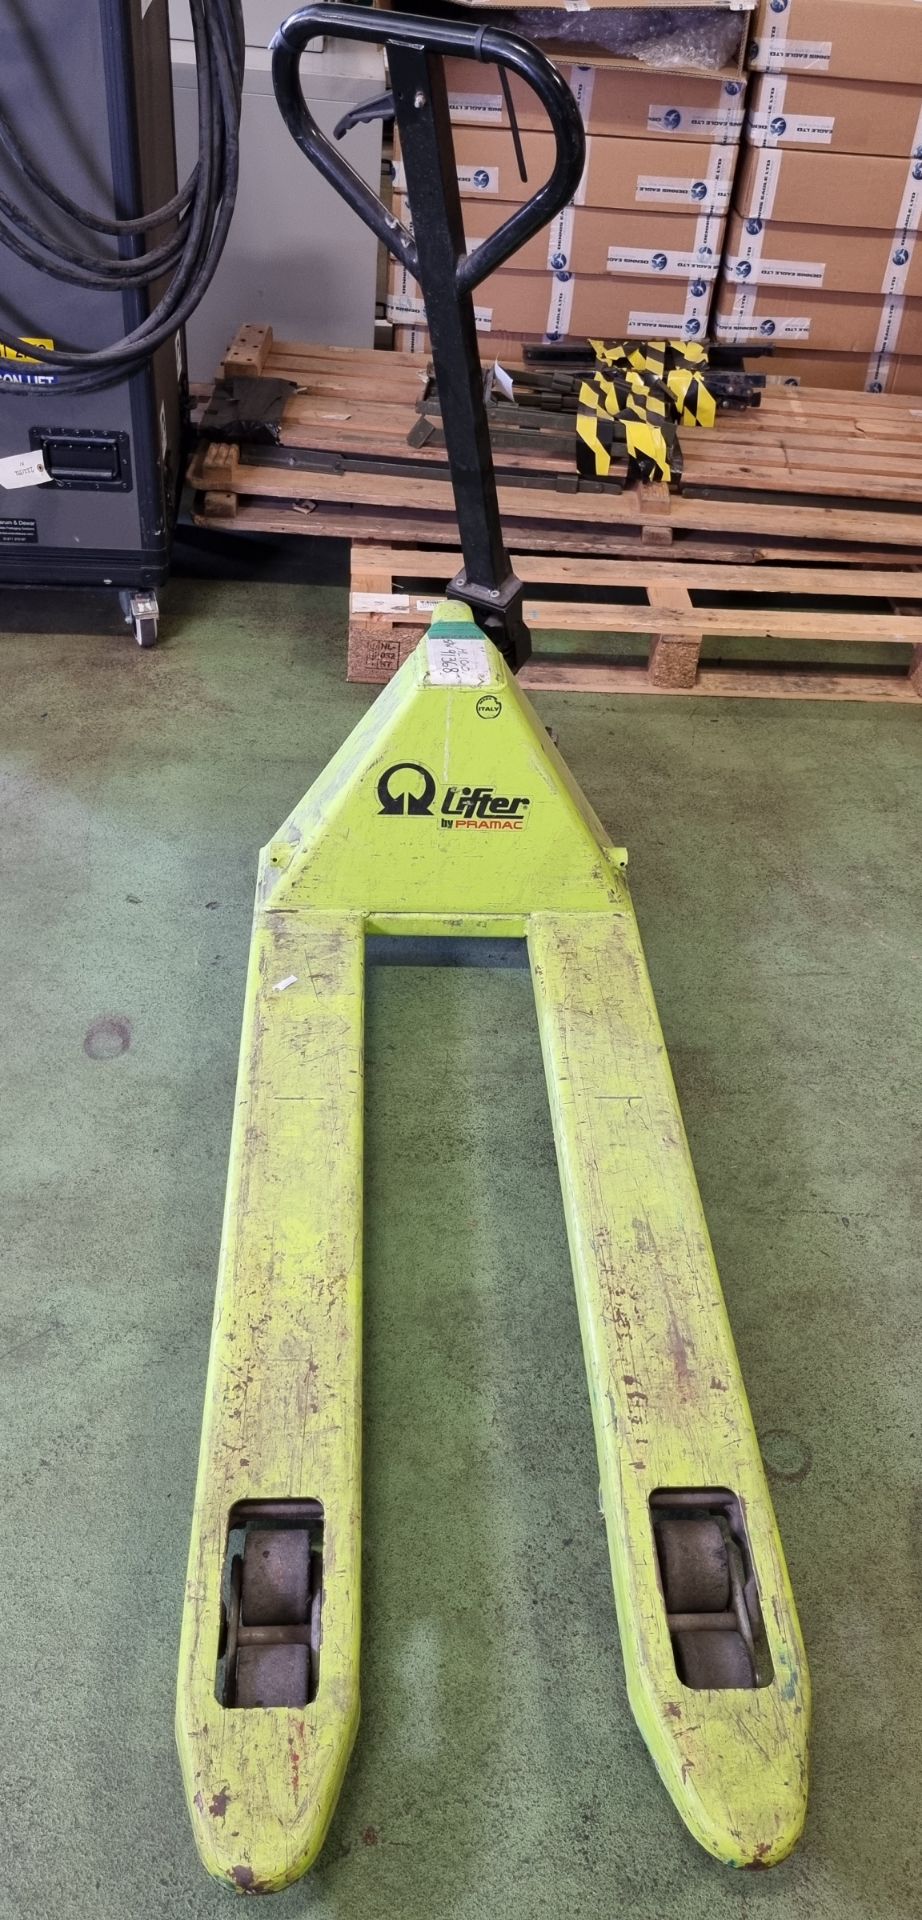 Primac Lifter hand pallet truck - SPARES AND REPAIRS - misaligned and missing a bolt - Image 2 of 3